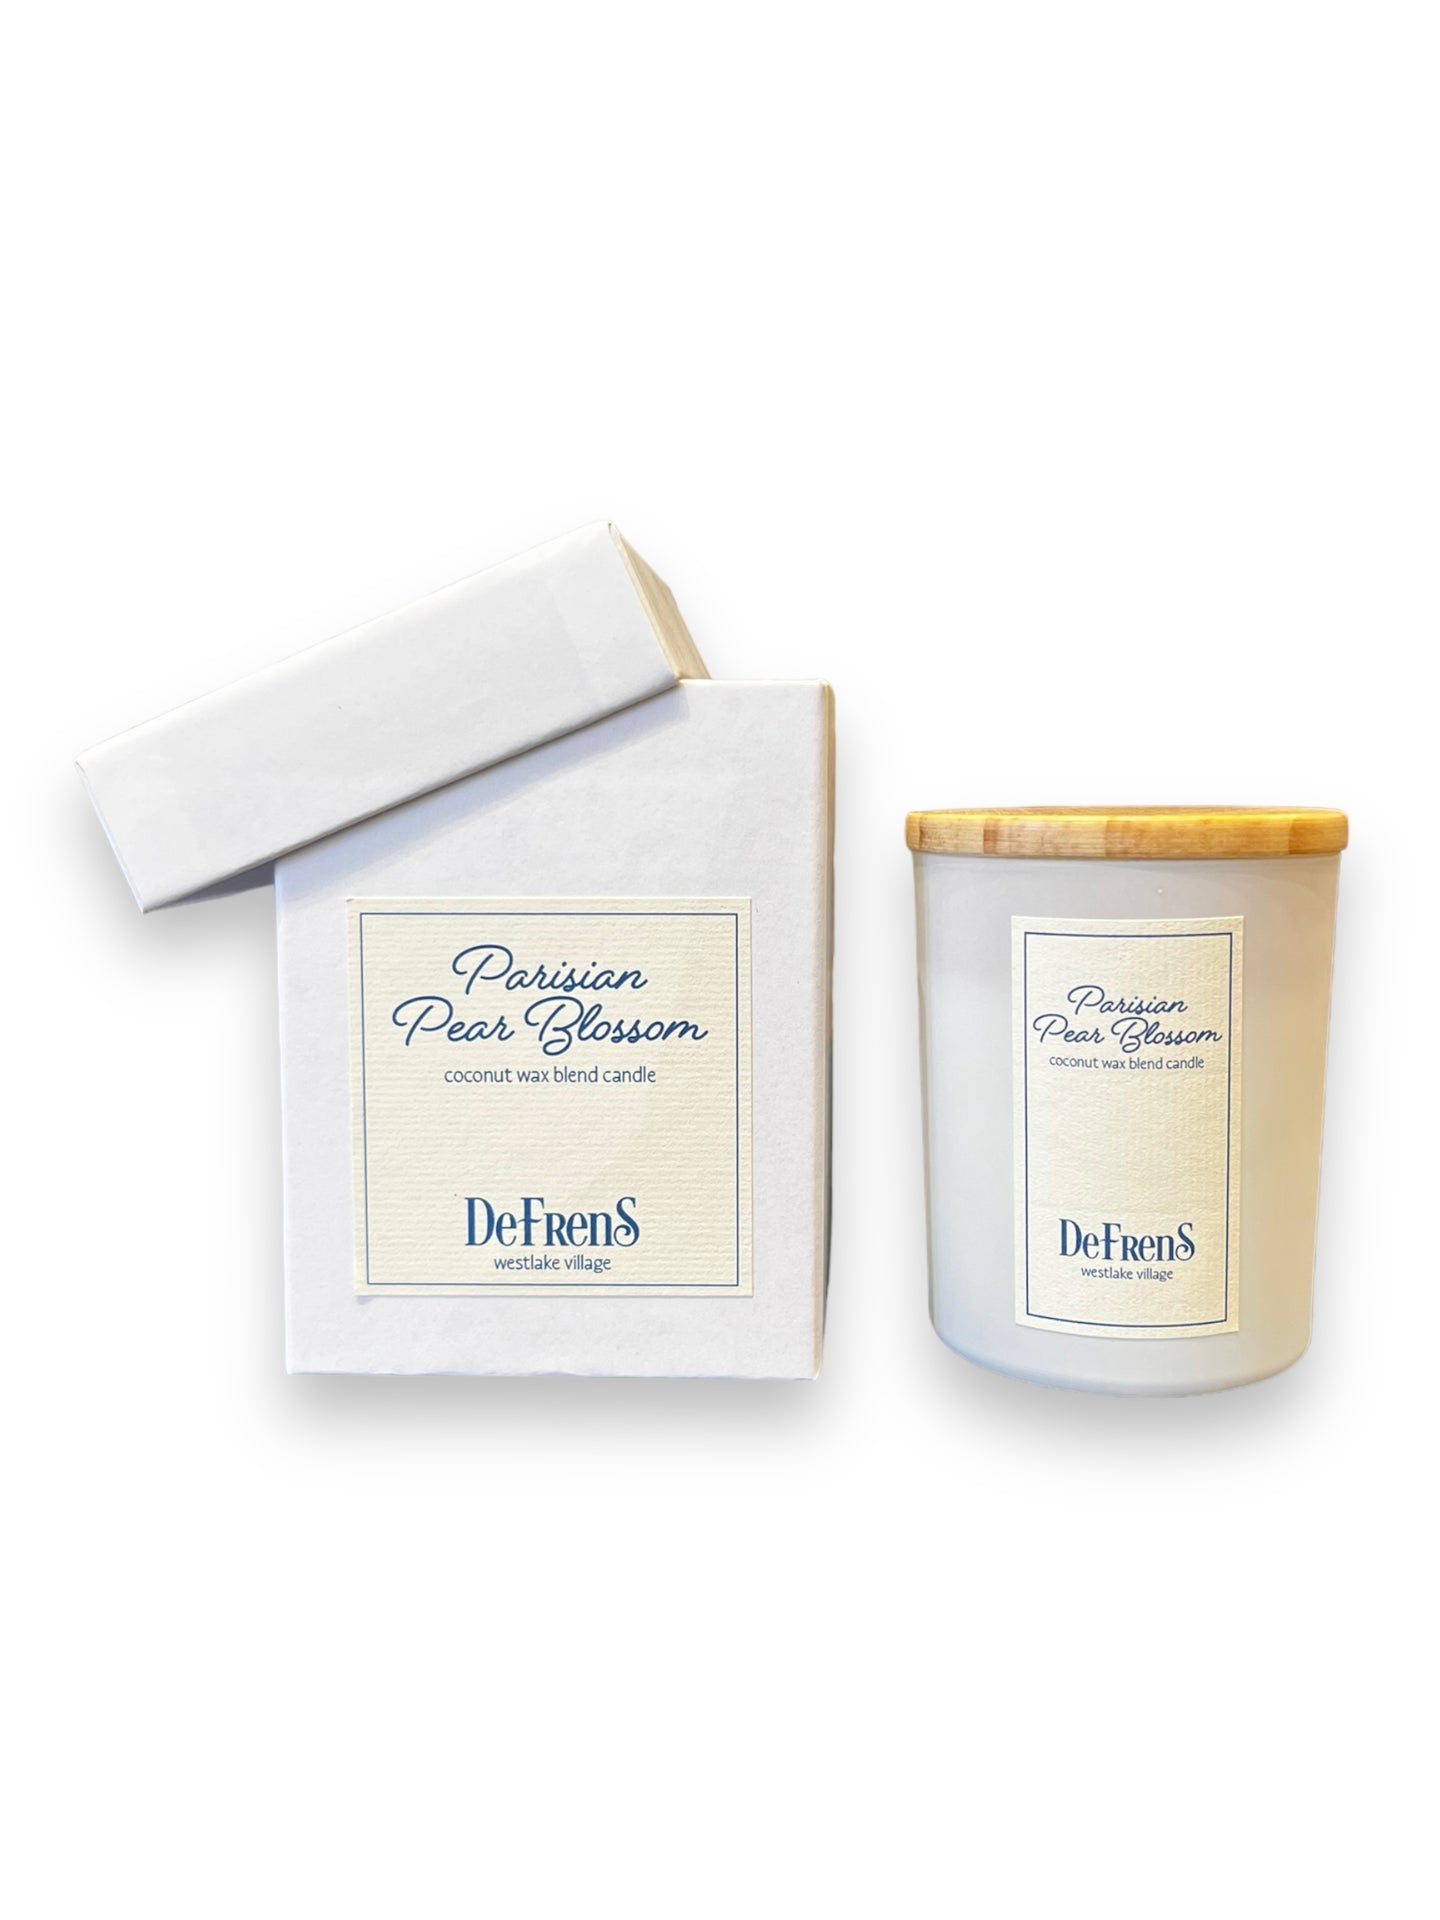 DeFrenS Parisian Pear Candle, Small 